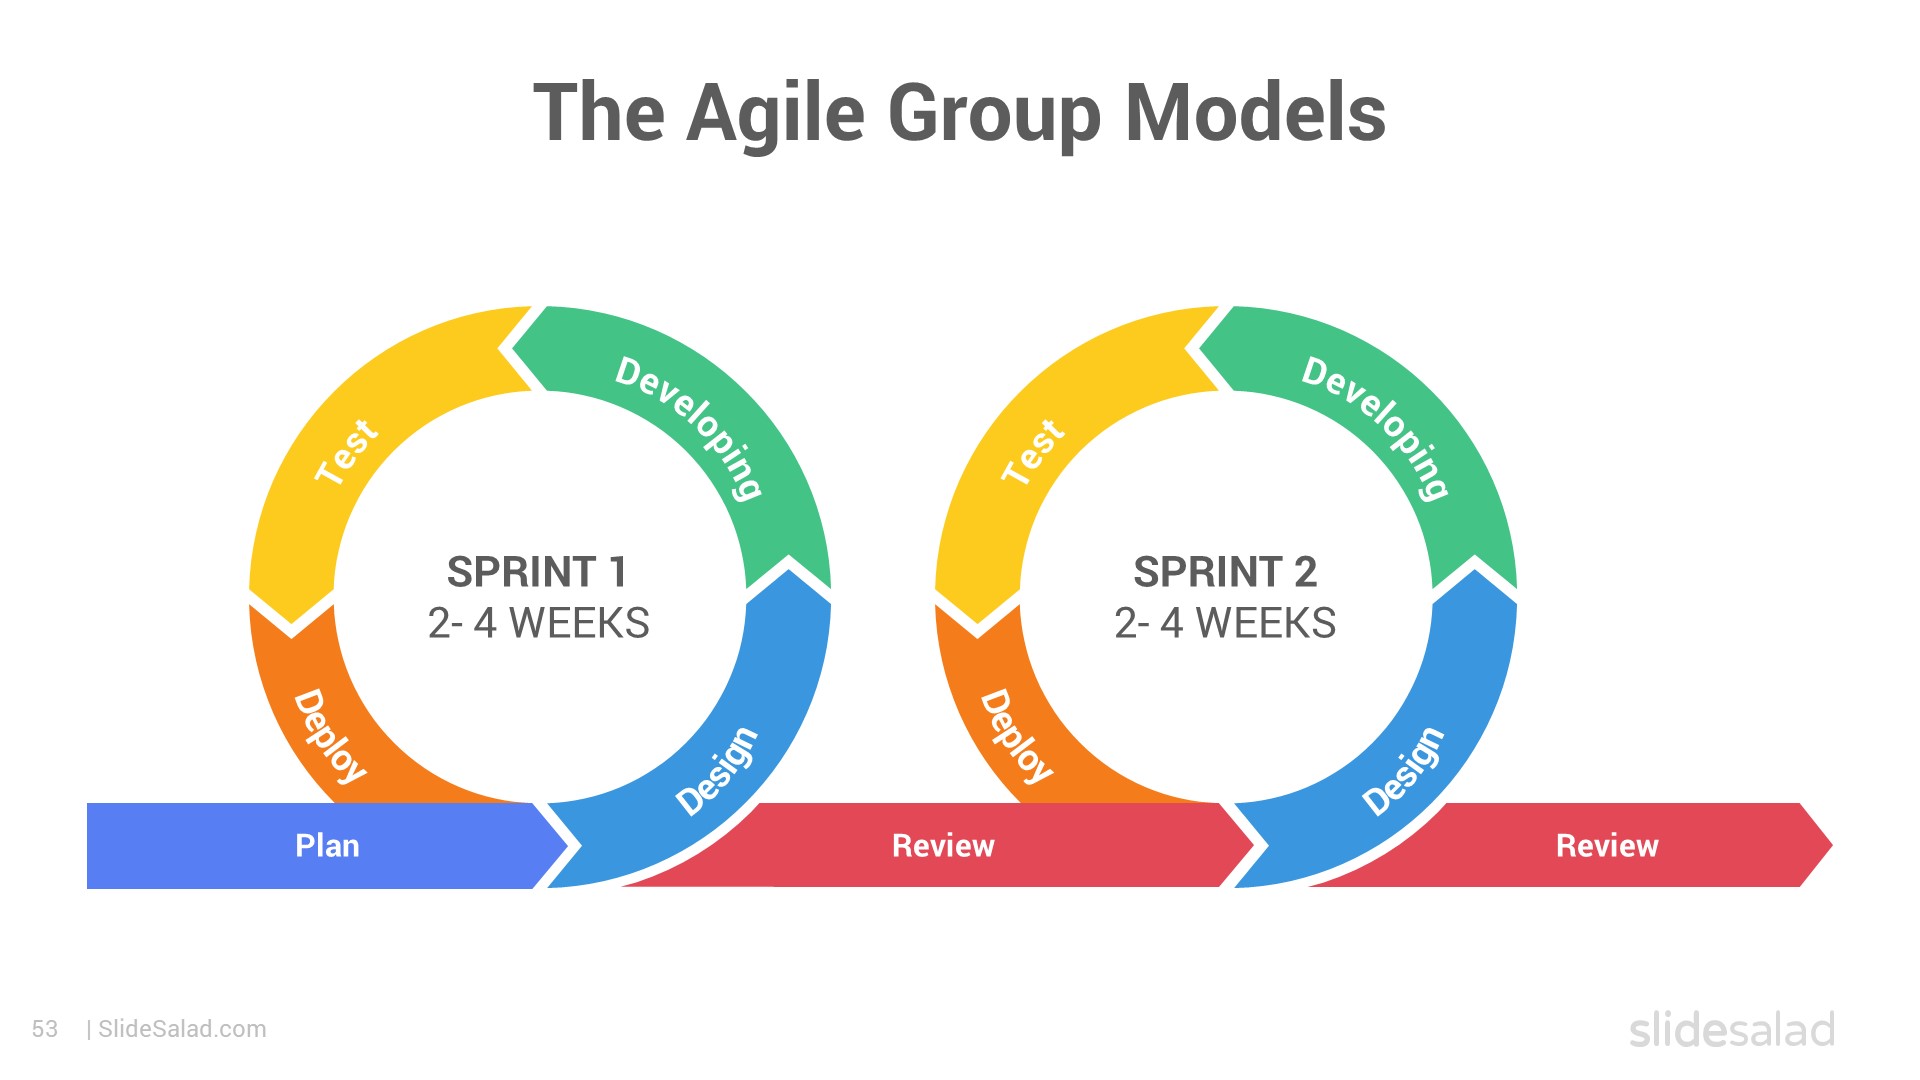 The Agile Group Models